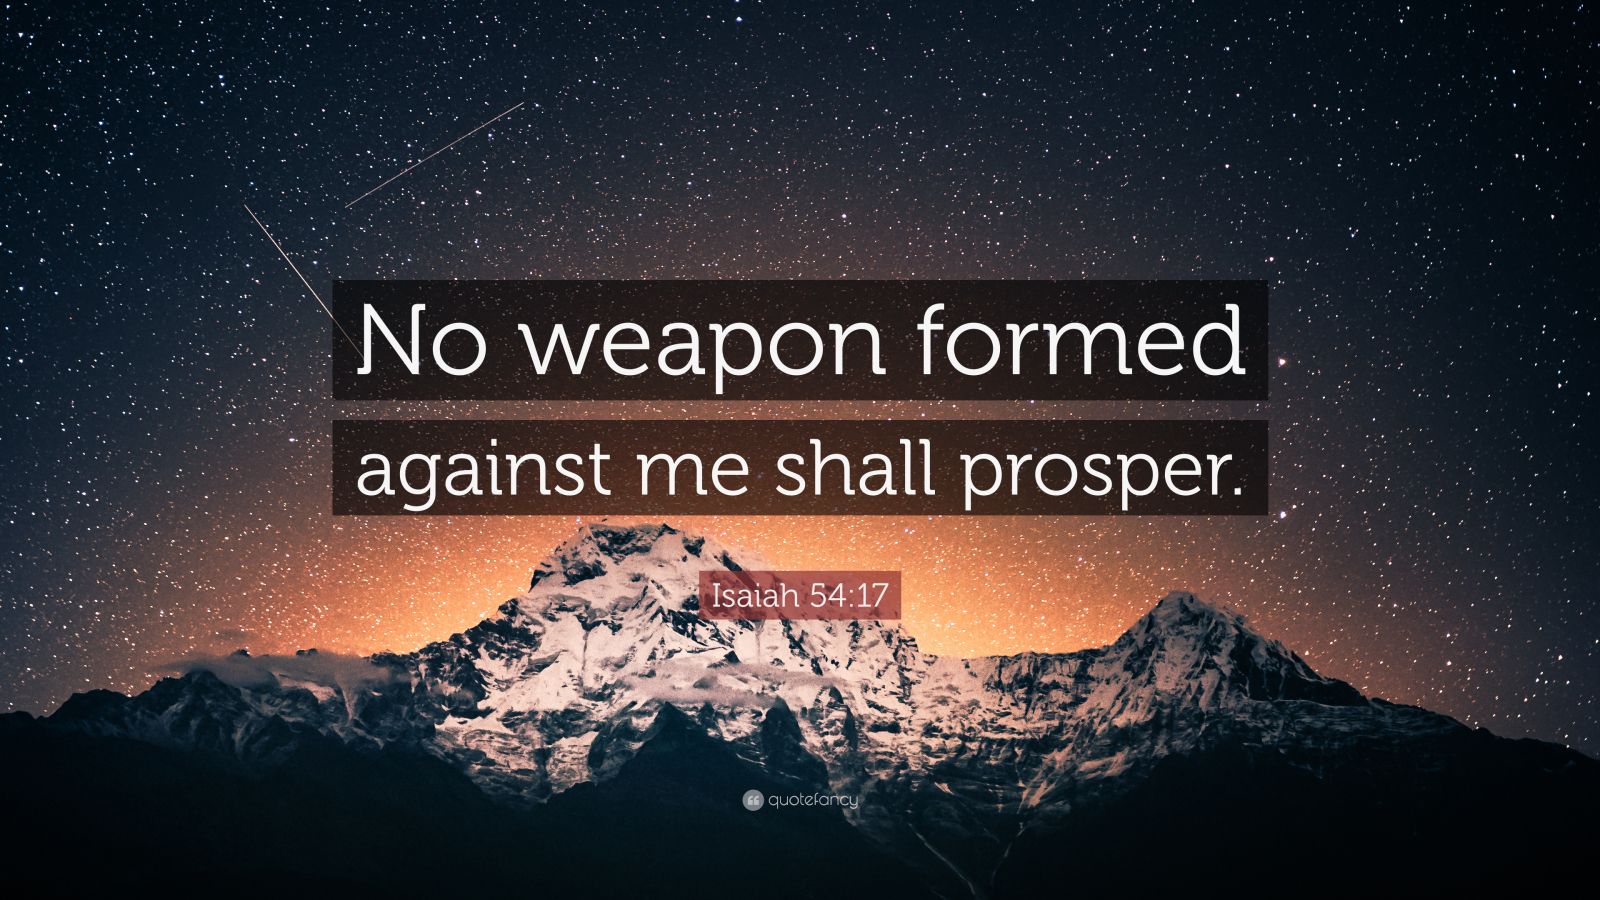 isaiah-54-17-quote-no-weapon-formed-against-me-shall-prosper-12